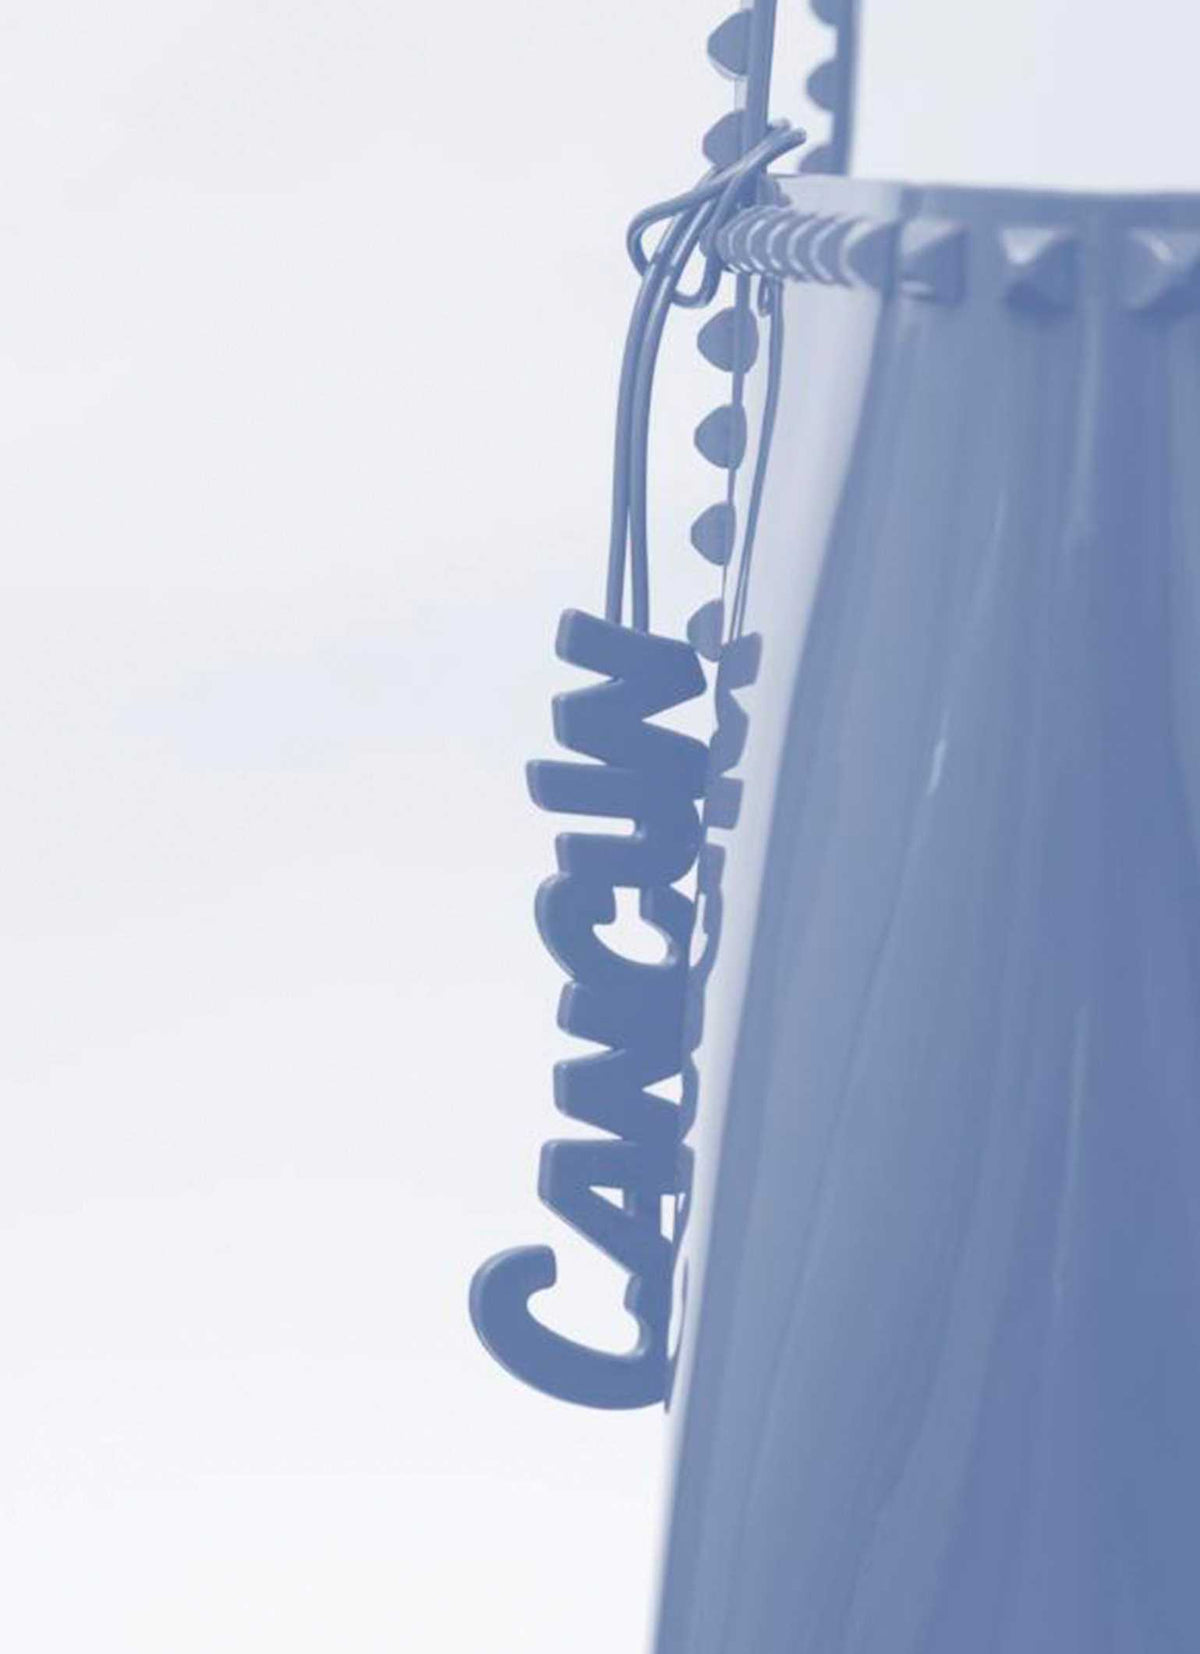 Carmen Sol Cancun jelly charms for purses in color baby blue which are waterproof